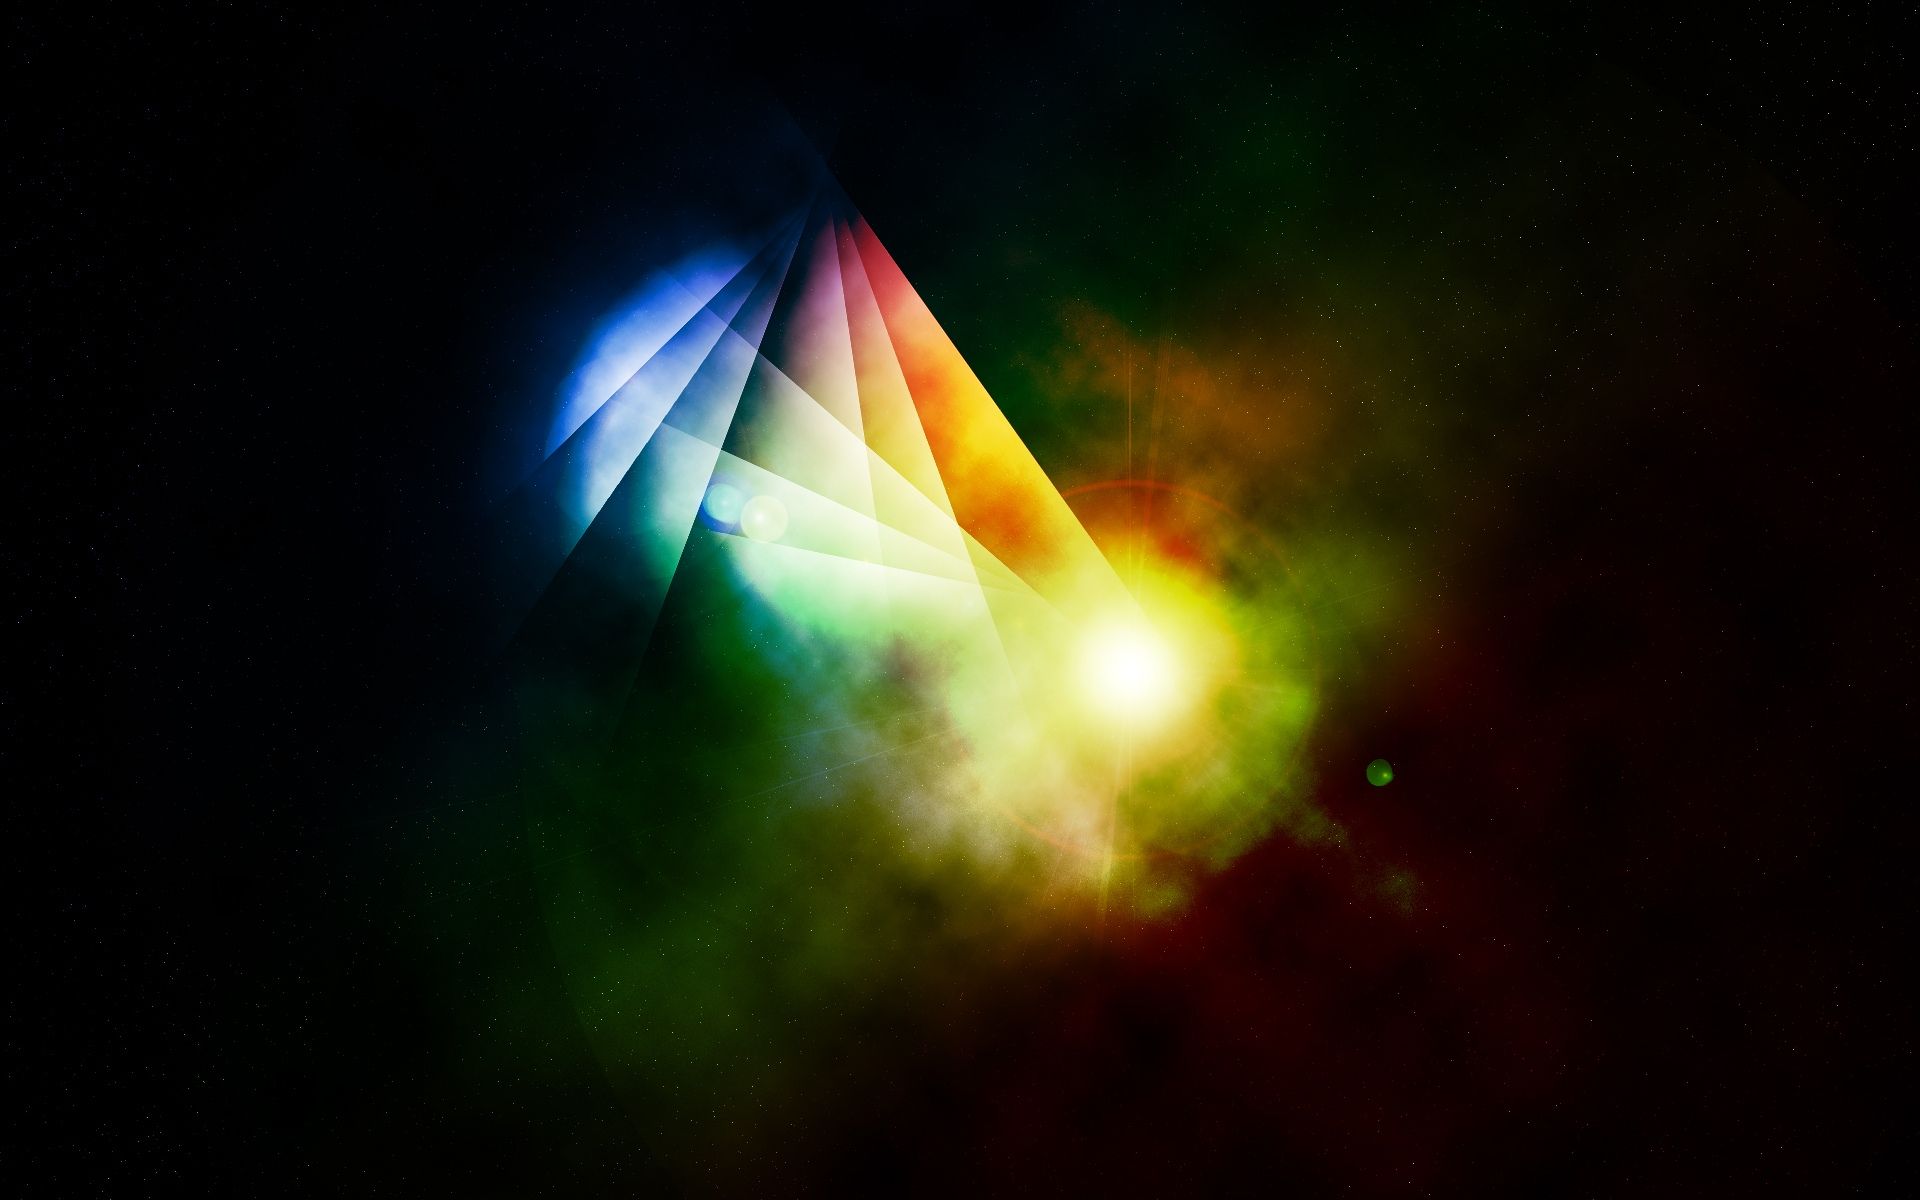 Photoshop, photon, light, background, wallpapers (#94857)